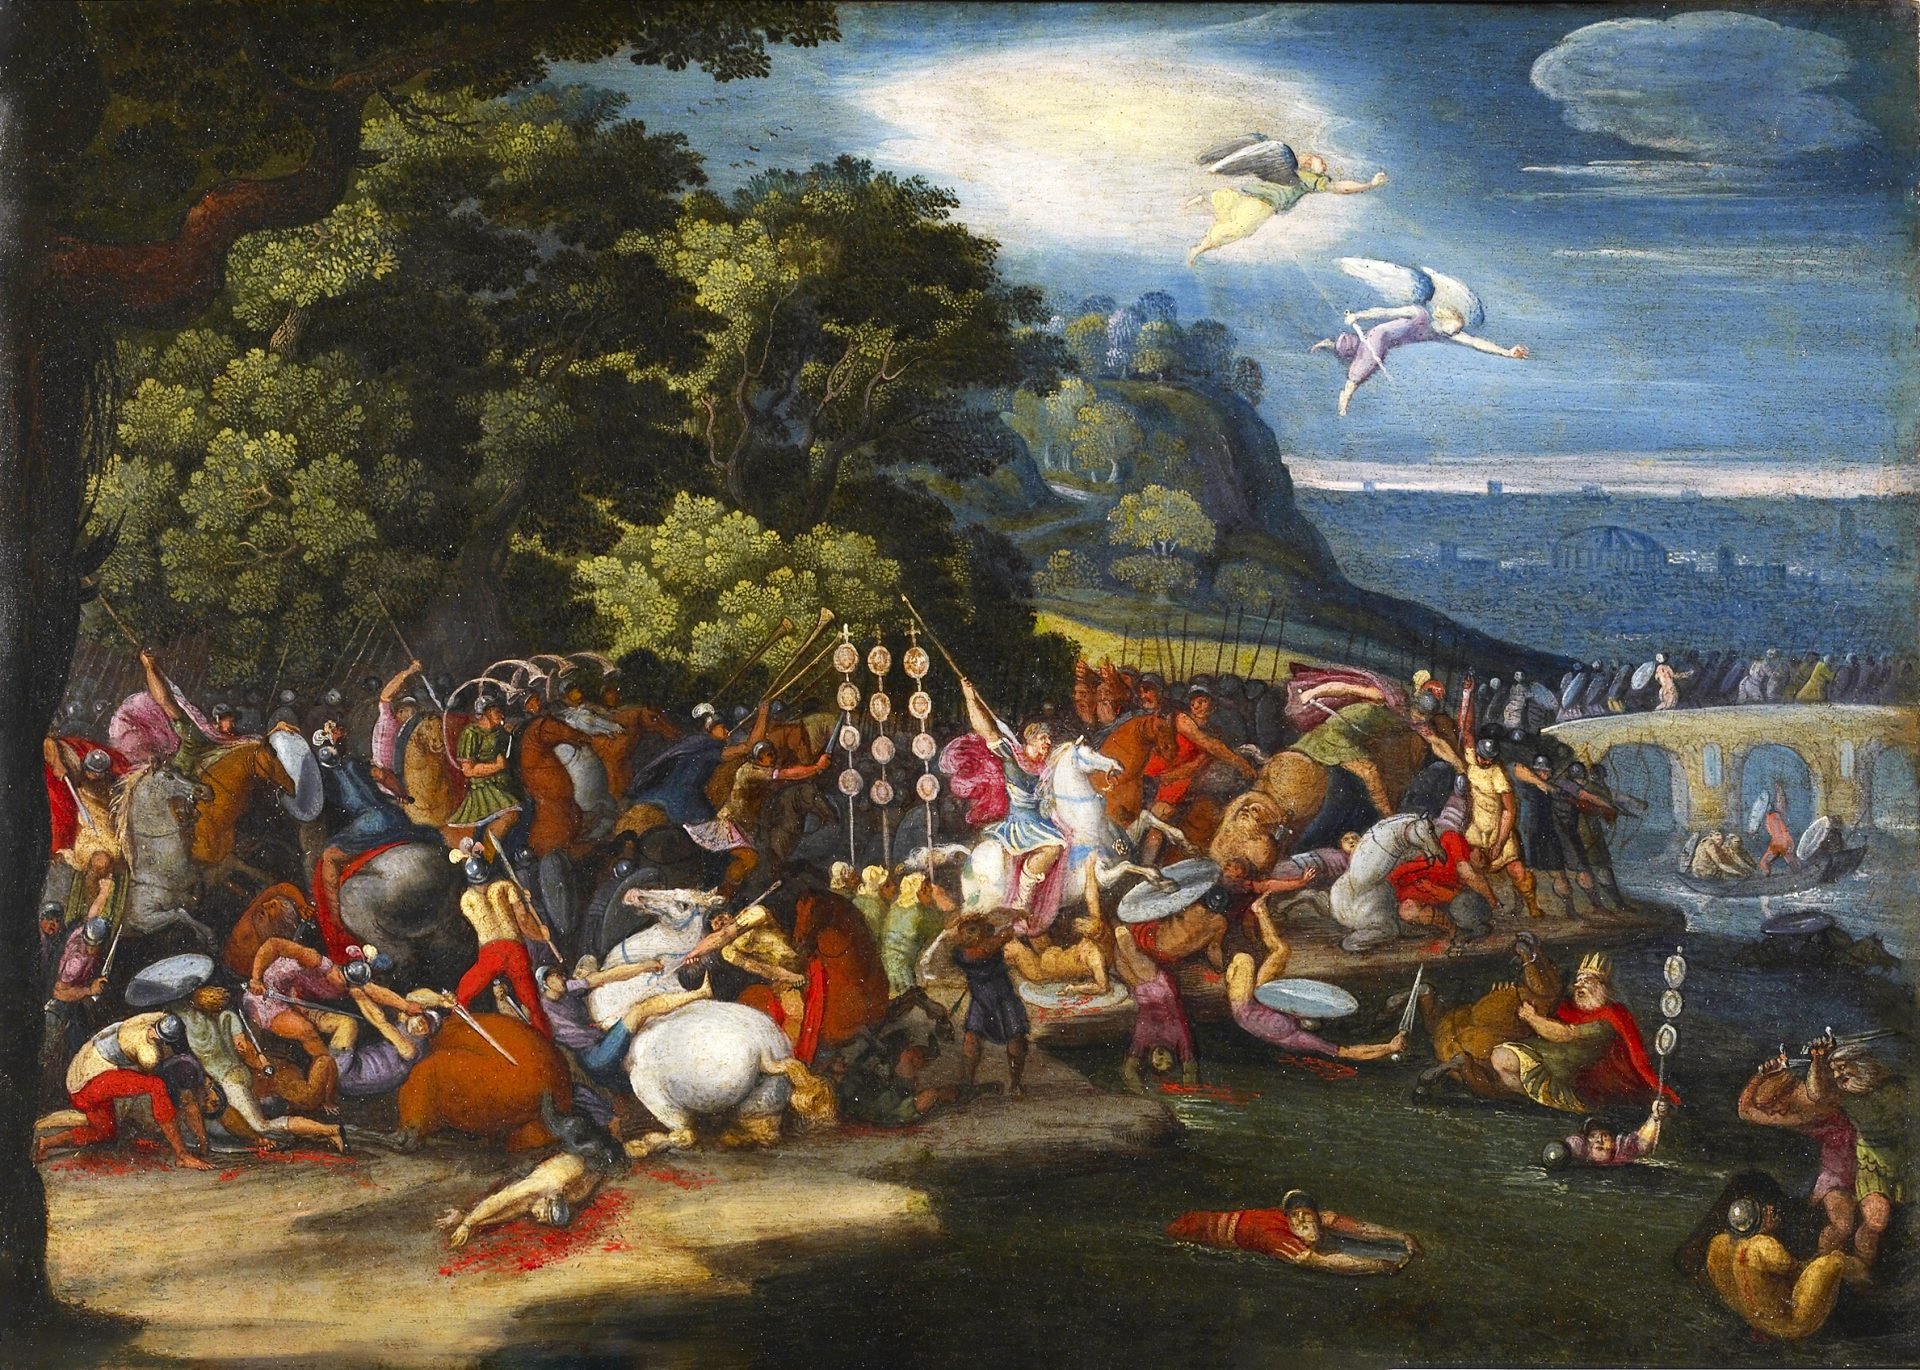 The artwork is inspired by a 16th-century fresco by Giulio Romano in the Vatican Palace and was likely commissioned by an Italian client in Rome. Flemish painters often created such small, cabinet-sized works featuring Roman subjects to meet local demand. This painting shows a battle of Constantine the Great at the Milvian Bridge. Two angels with swords are flying towards the bridge to help Constantine.